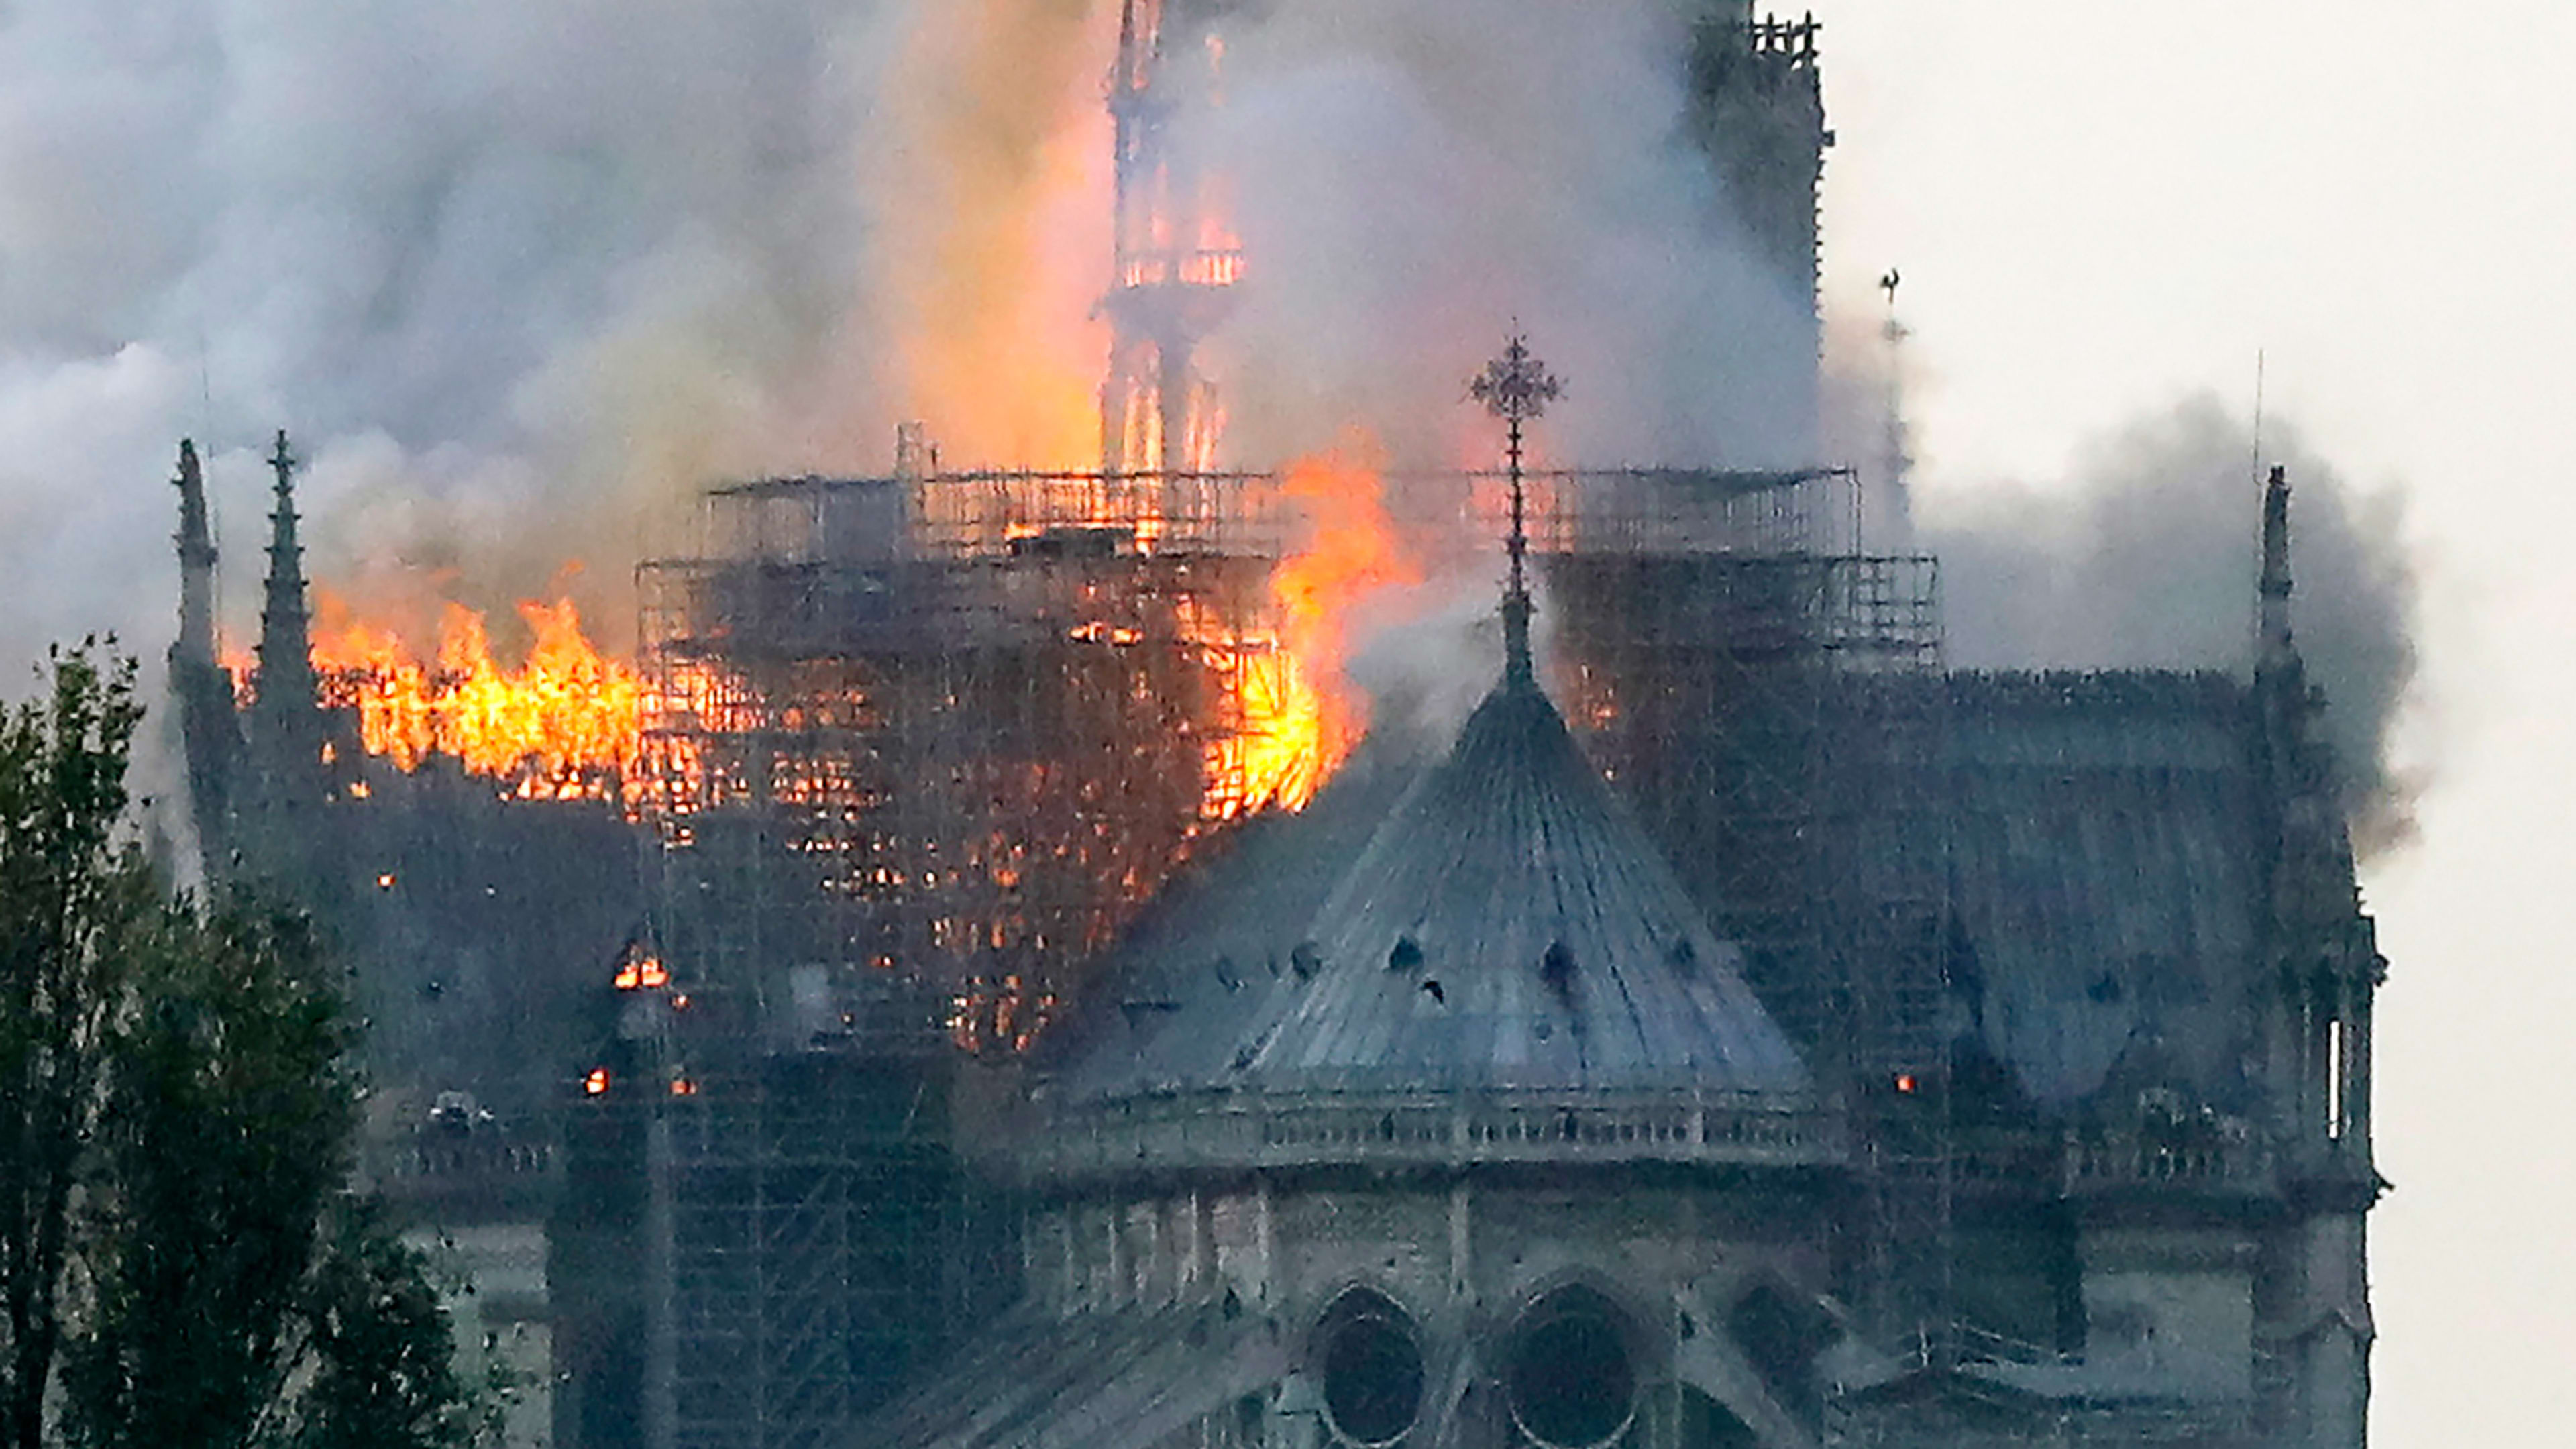 Notre Dame fire: Videos show 850-year-old Paris cathedral ablaze